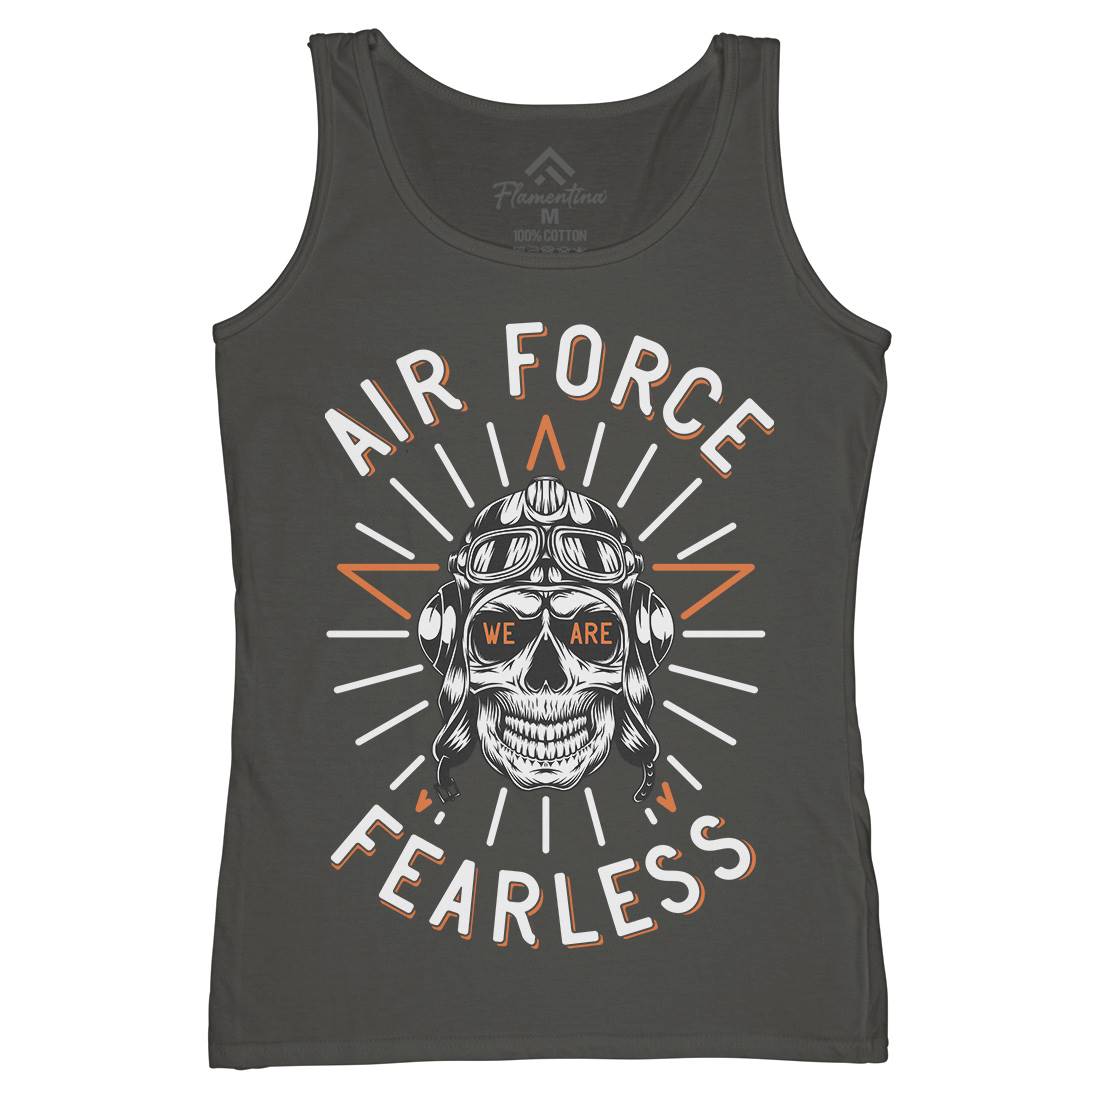 Air Force Fearless Womens Organic Tank Top Vest Army D900